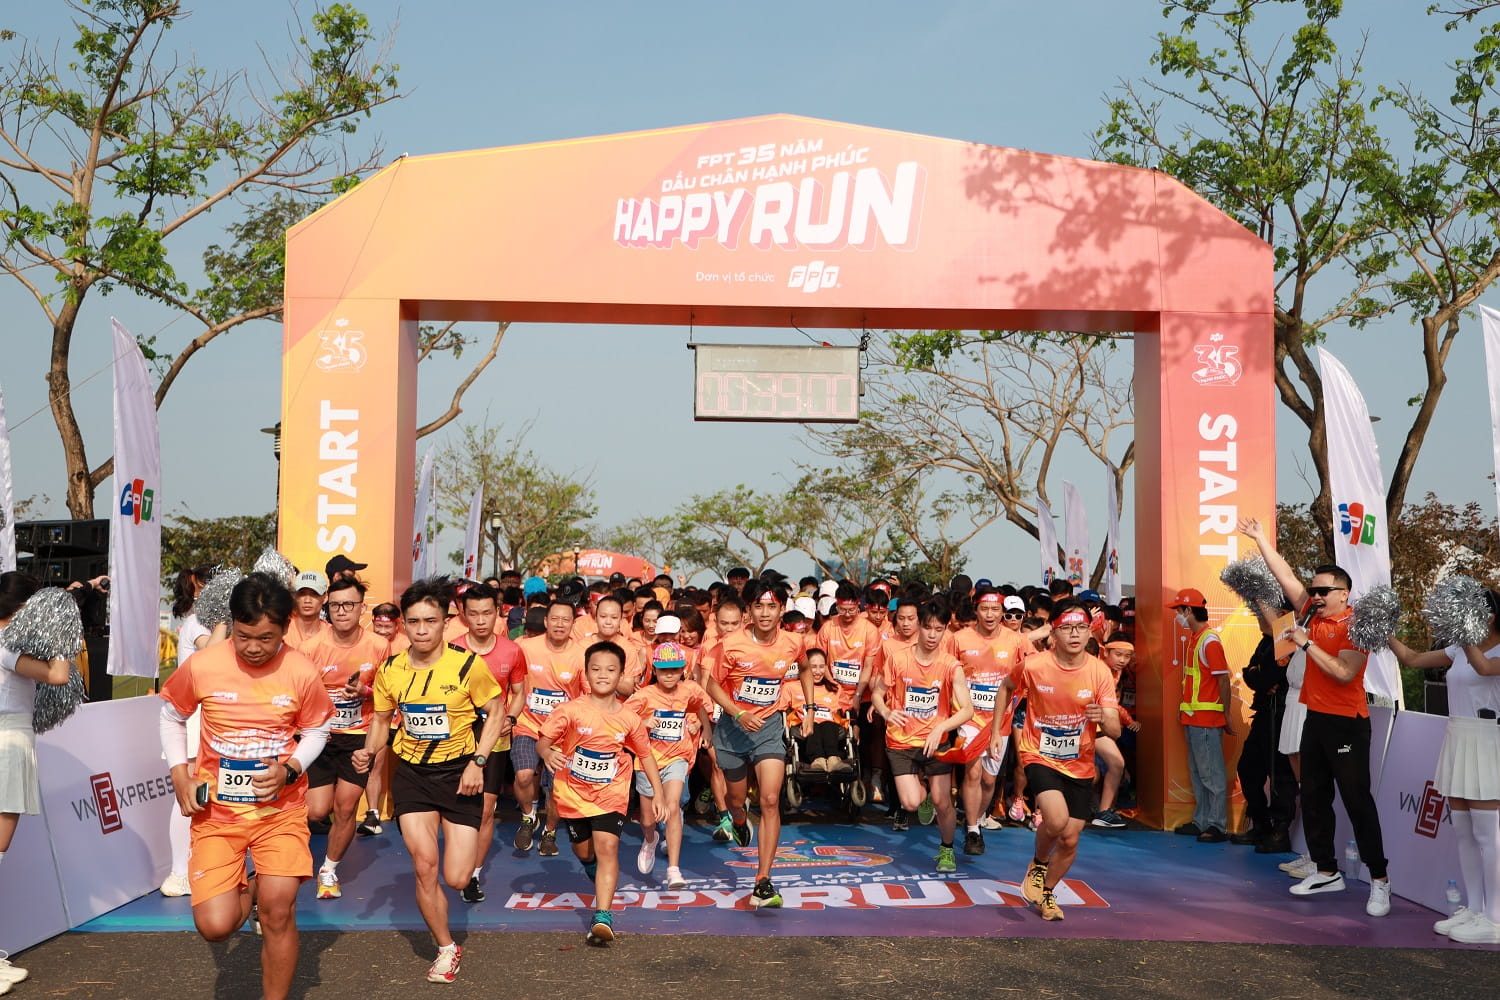 The Happy Run in Da Nang and Quy Nhon attracted 6,000 participants